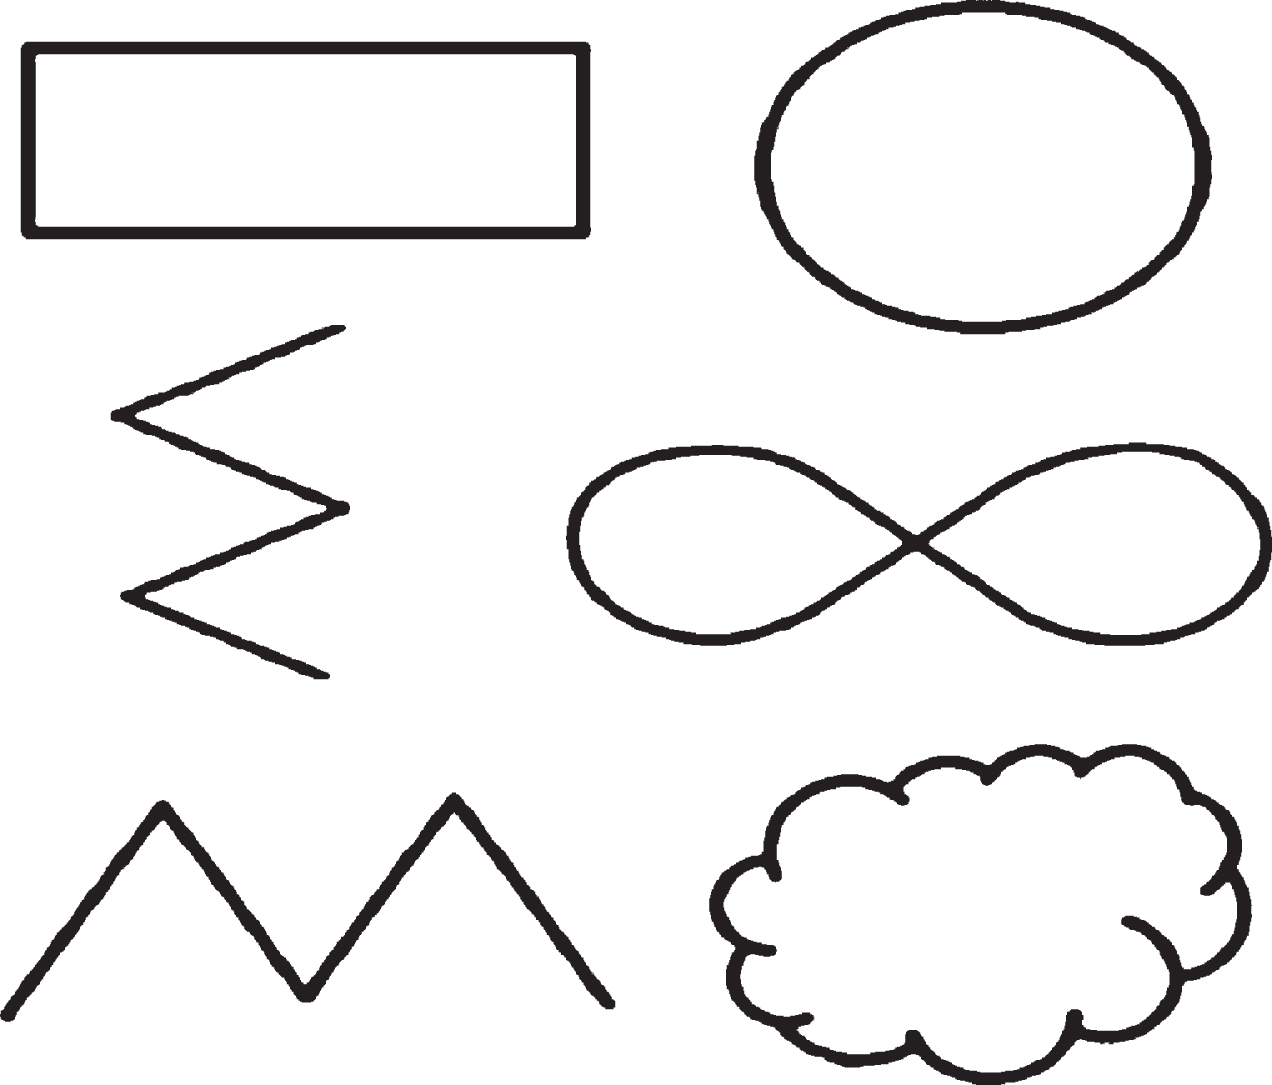 The shapes outlined by the robotic arm. Left column: The sharp movements Rectangle, Horizontal zigzag and Vertical zigzag. Right column: Circle, Infinity sign and Cloud.